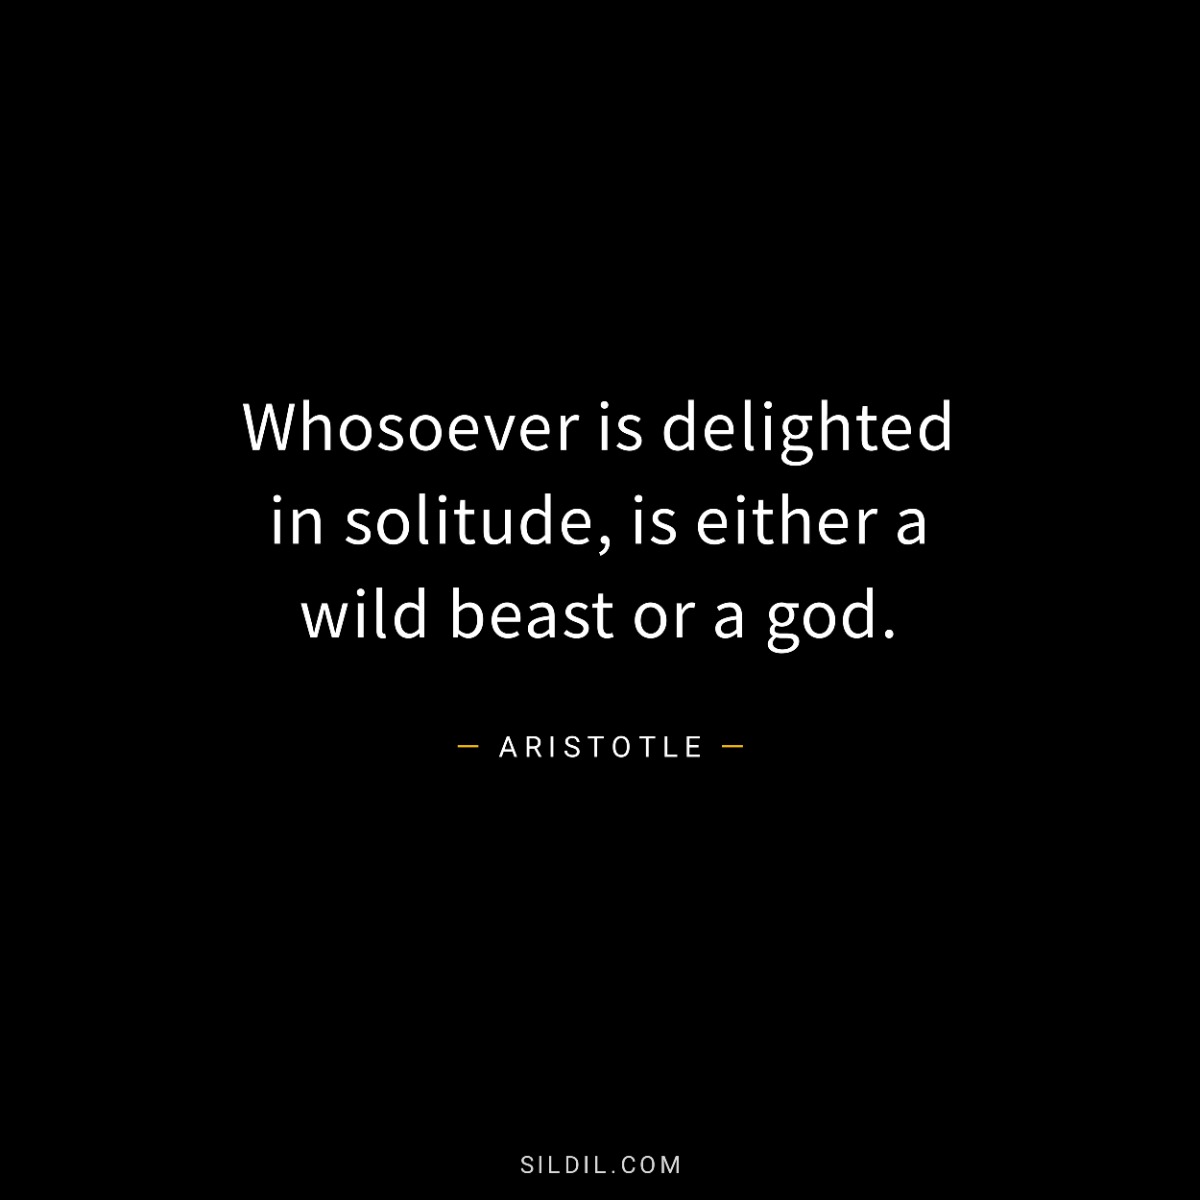 Whosoever is delighted in solitude, is either a wild beast or a god.